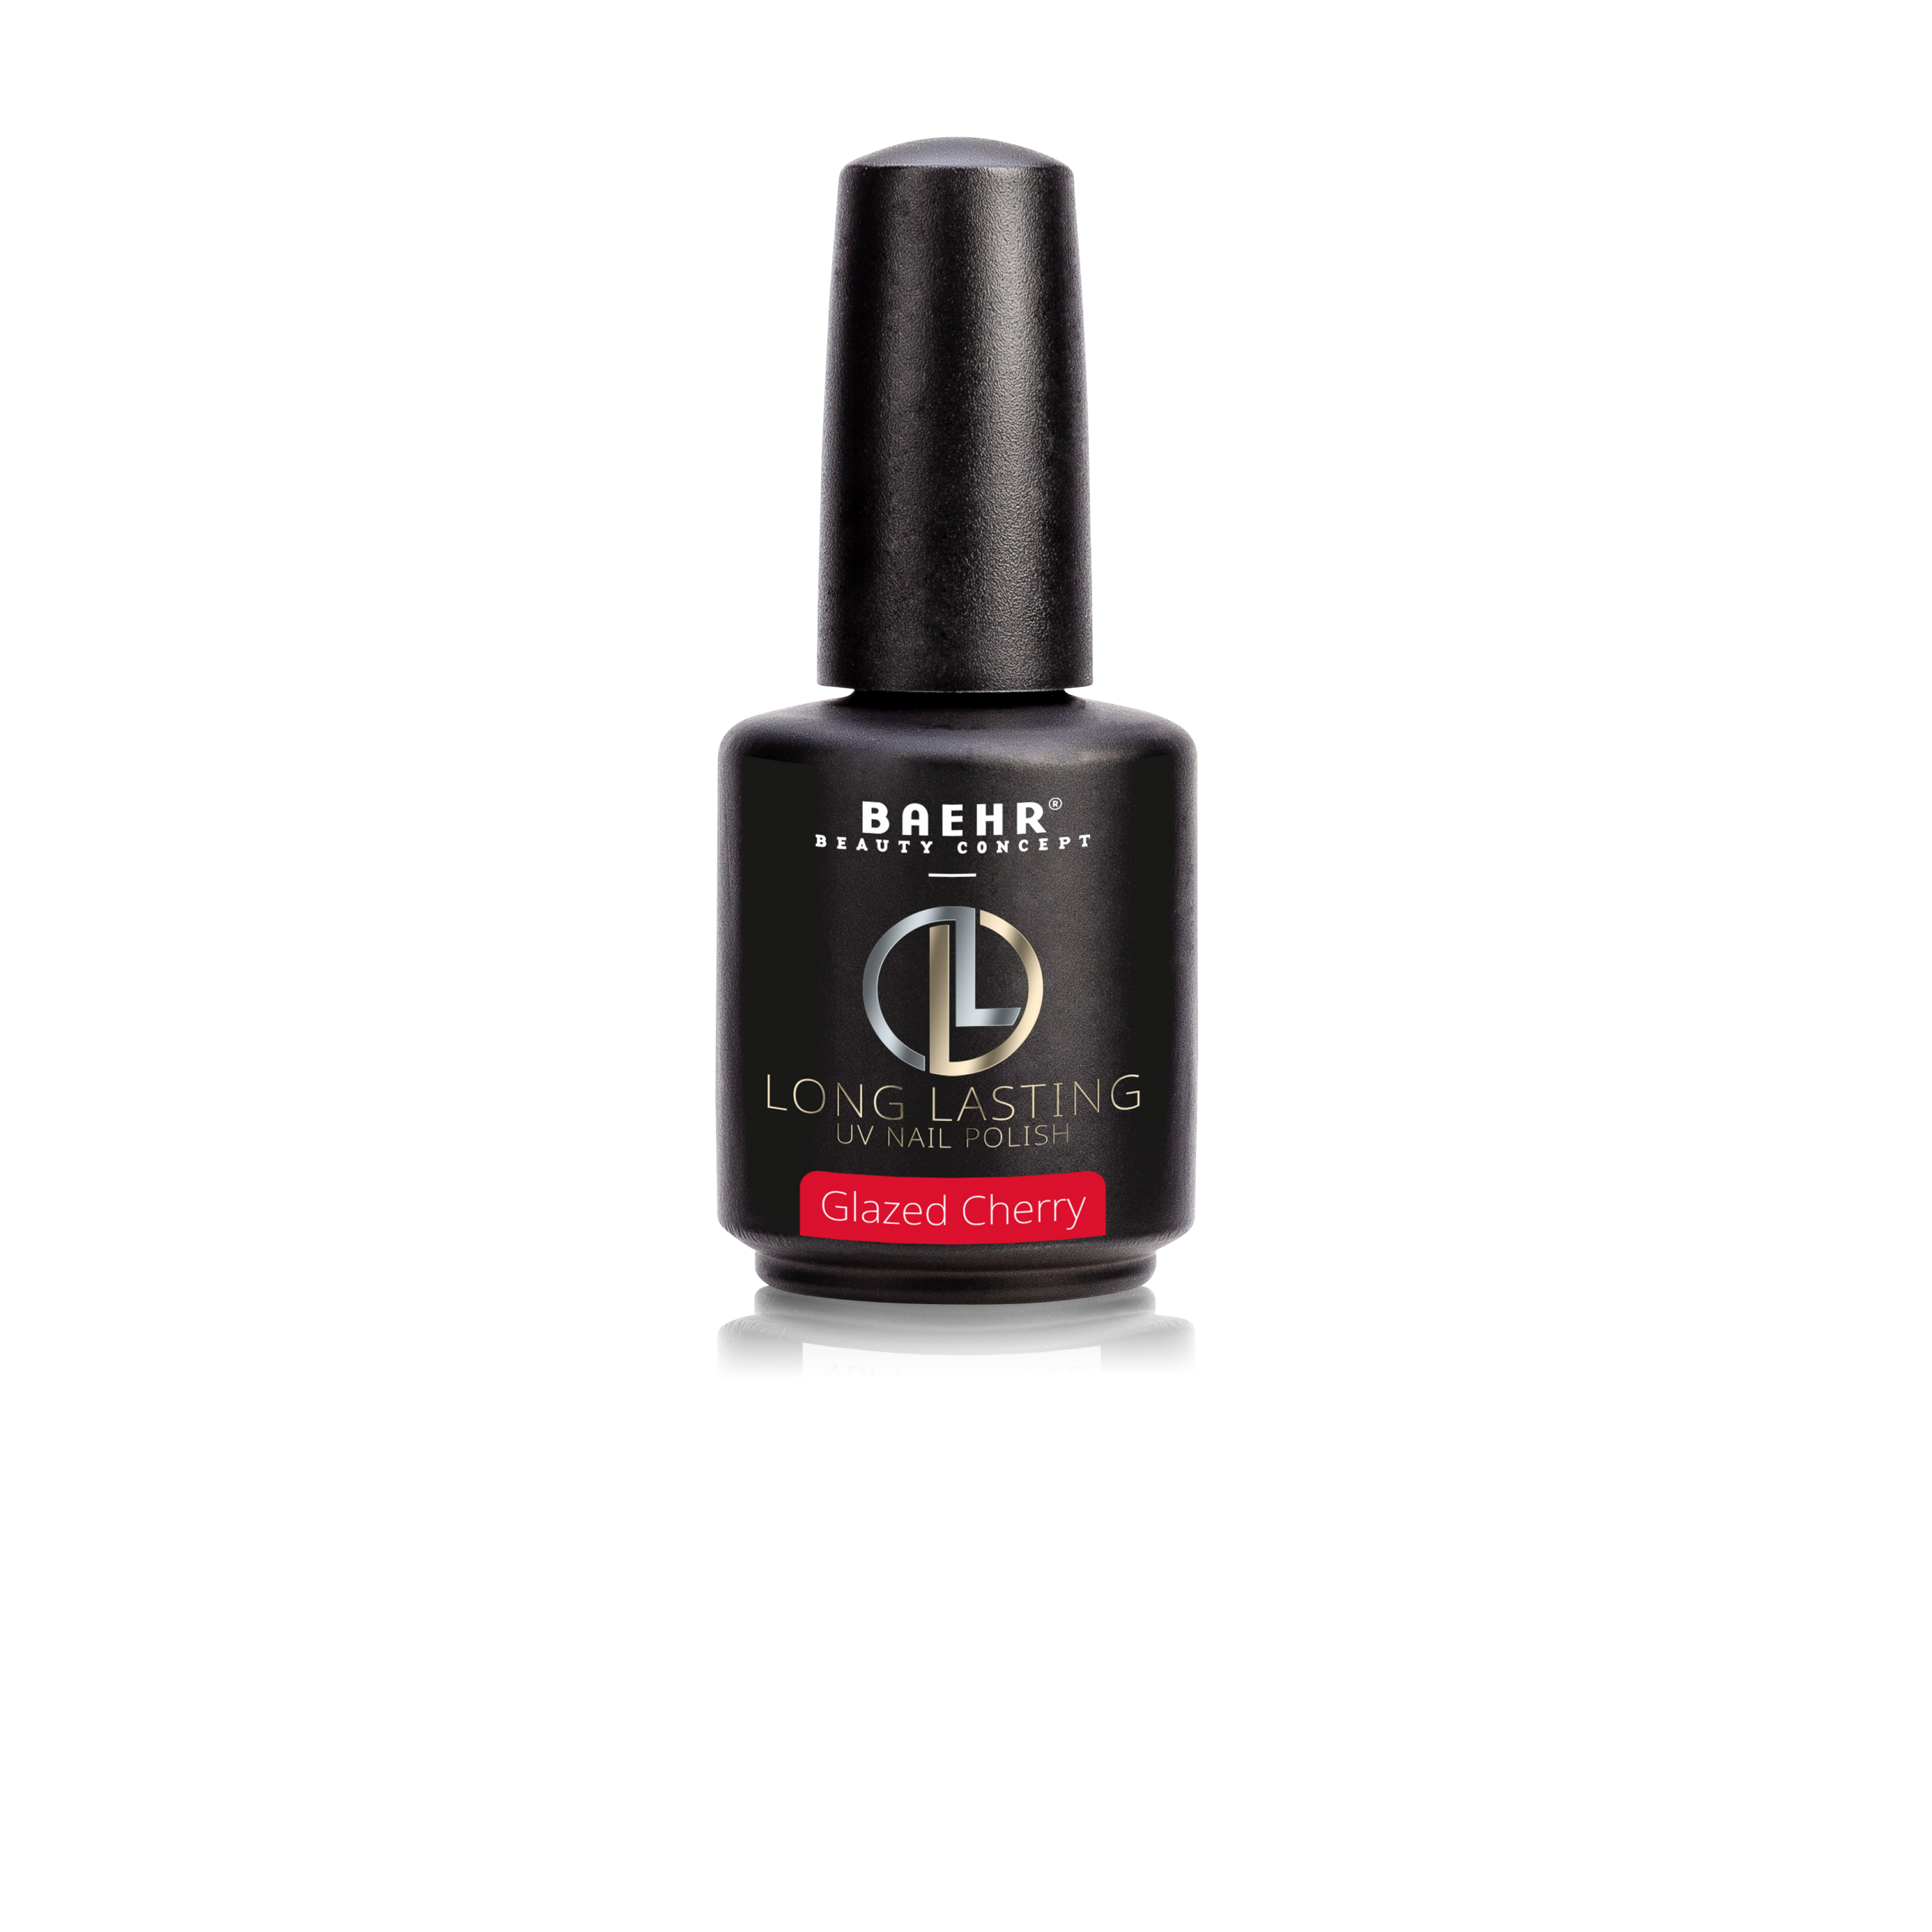 BAEHR BEAUTY CONCEPT - NAILS Long Lasting Glazed Cherry, 13 g